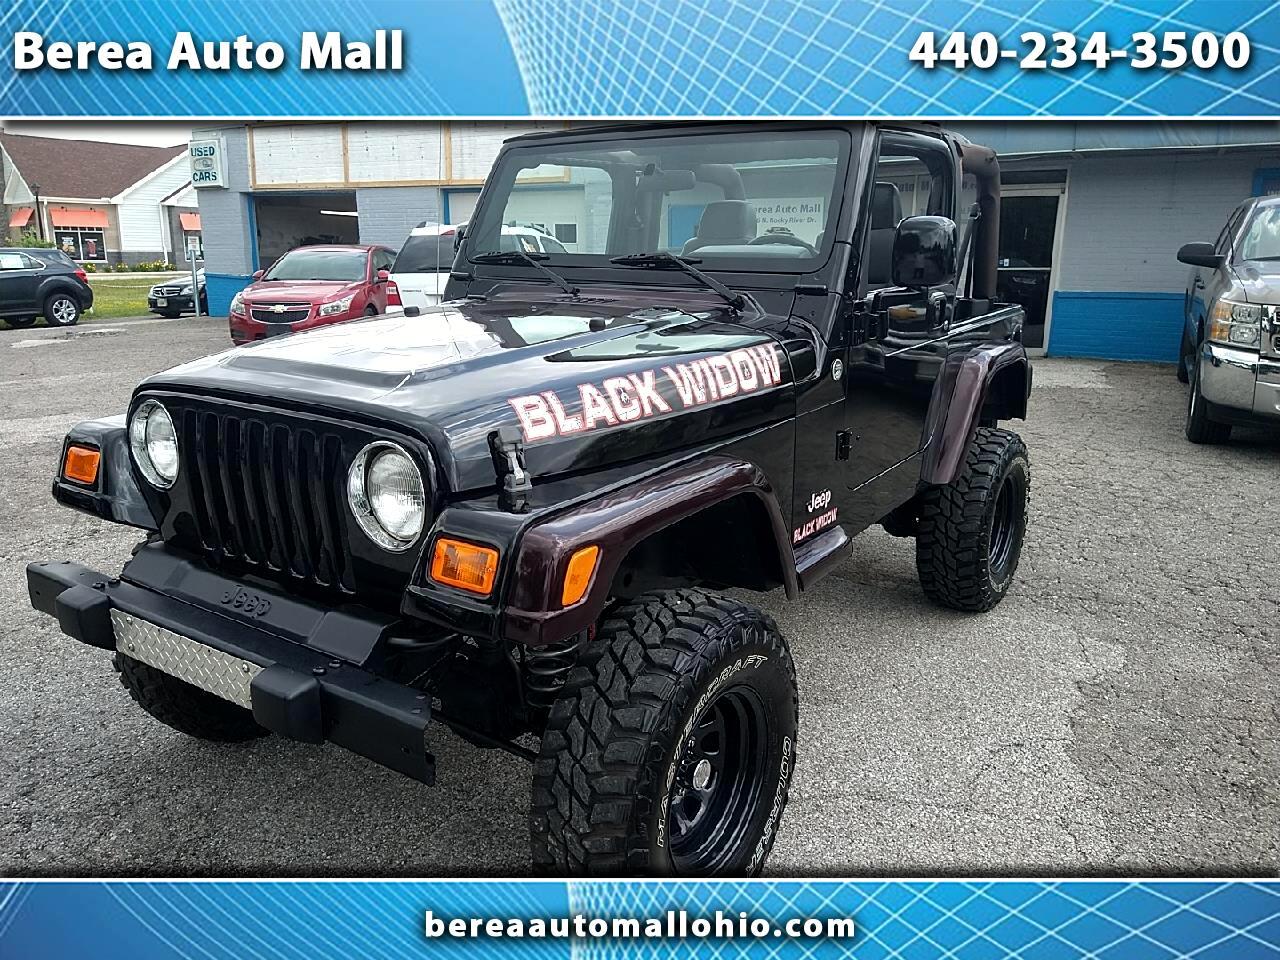 Used 2006 Jeep Wrangler 2dr SE for Sale in Berea OH 44017 Berea Auto Mall